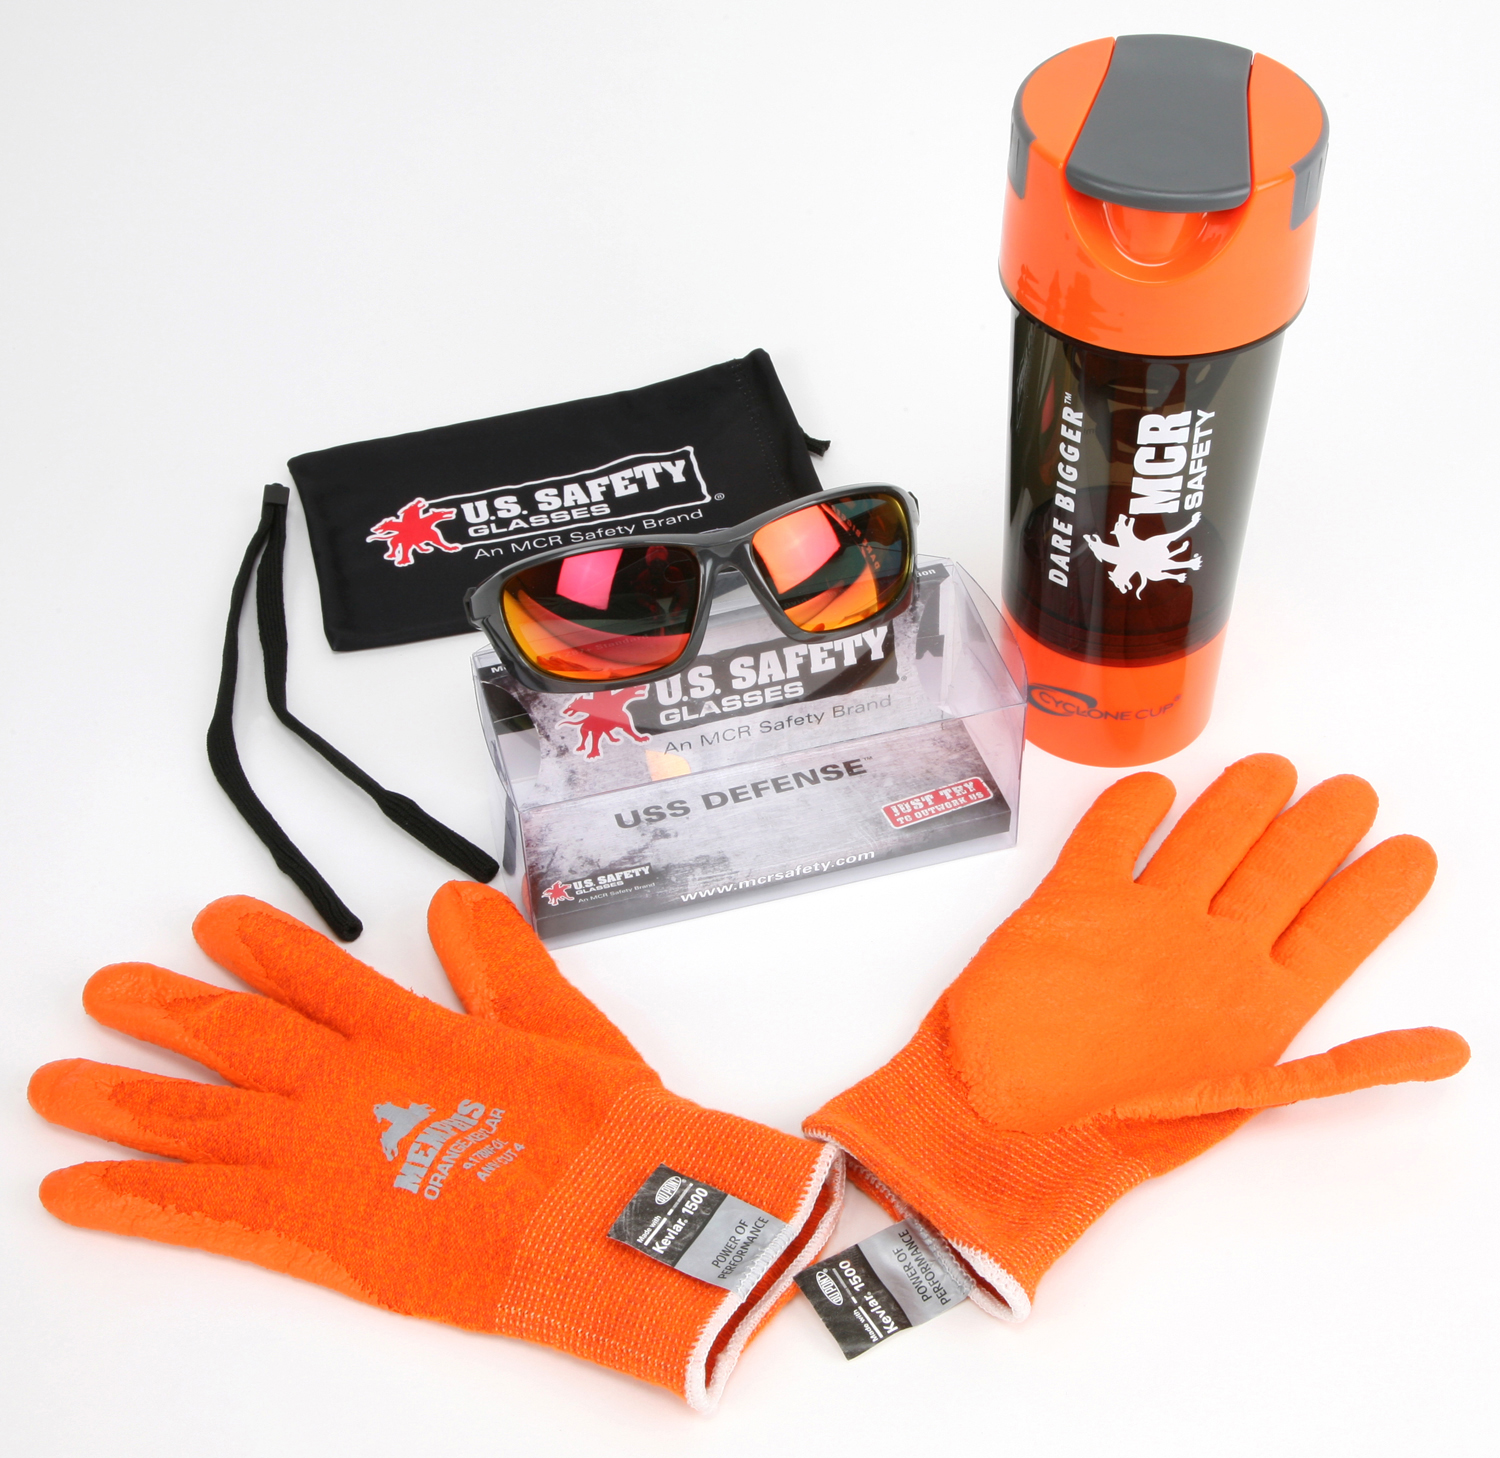 MCR Safety Kit featuring MCR Gloves made with DuPont™ Kevlar®